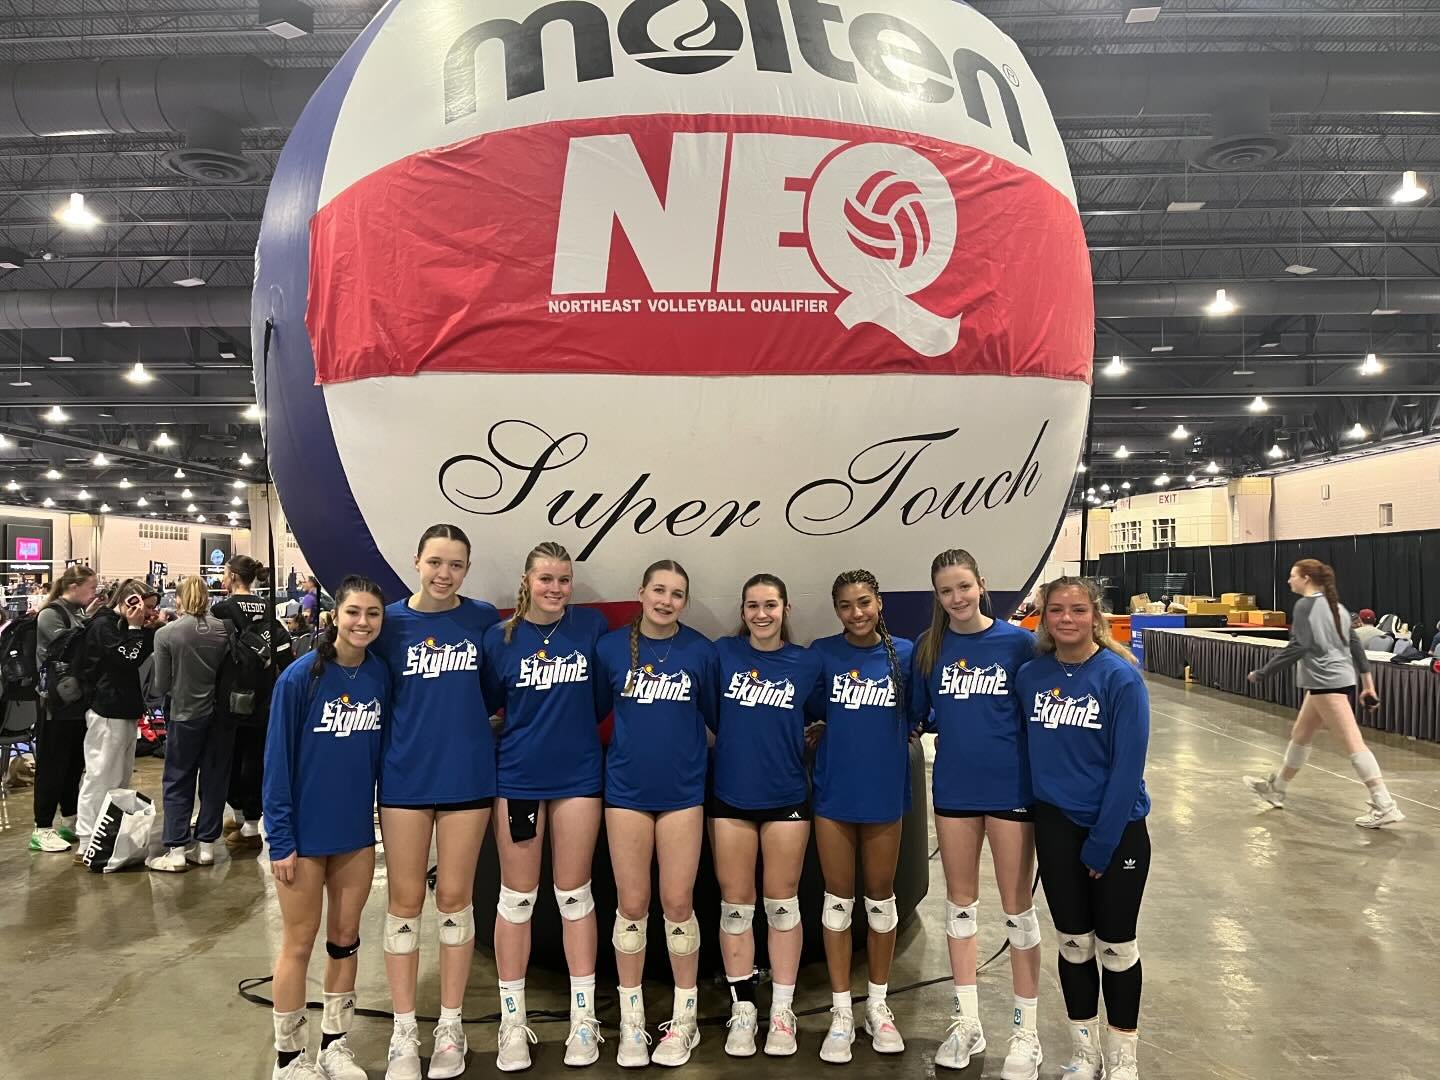 15 Royal win their bracket day 3 of NEQ!! They finish the tournament with a 6-2 record, great job girls!!
.
.
.
#coskylinejrs #15Royal #NEQ